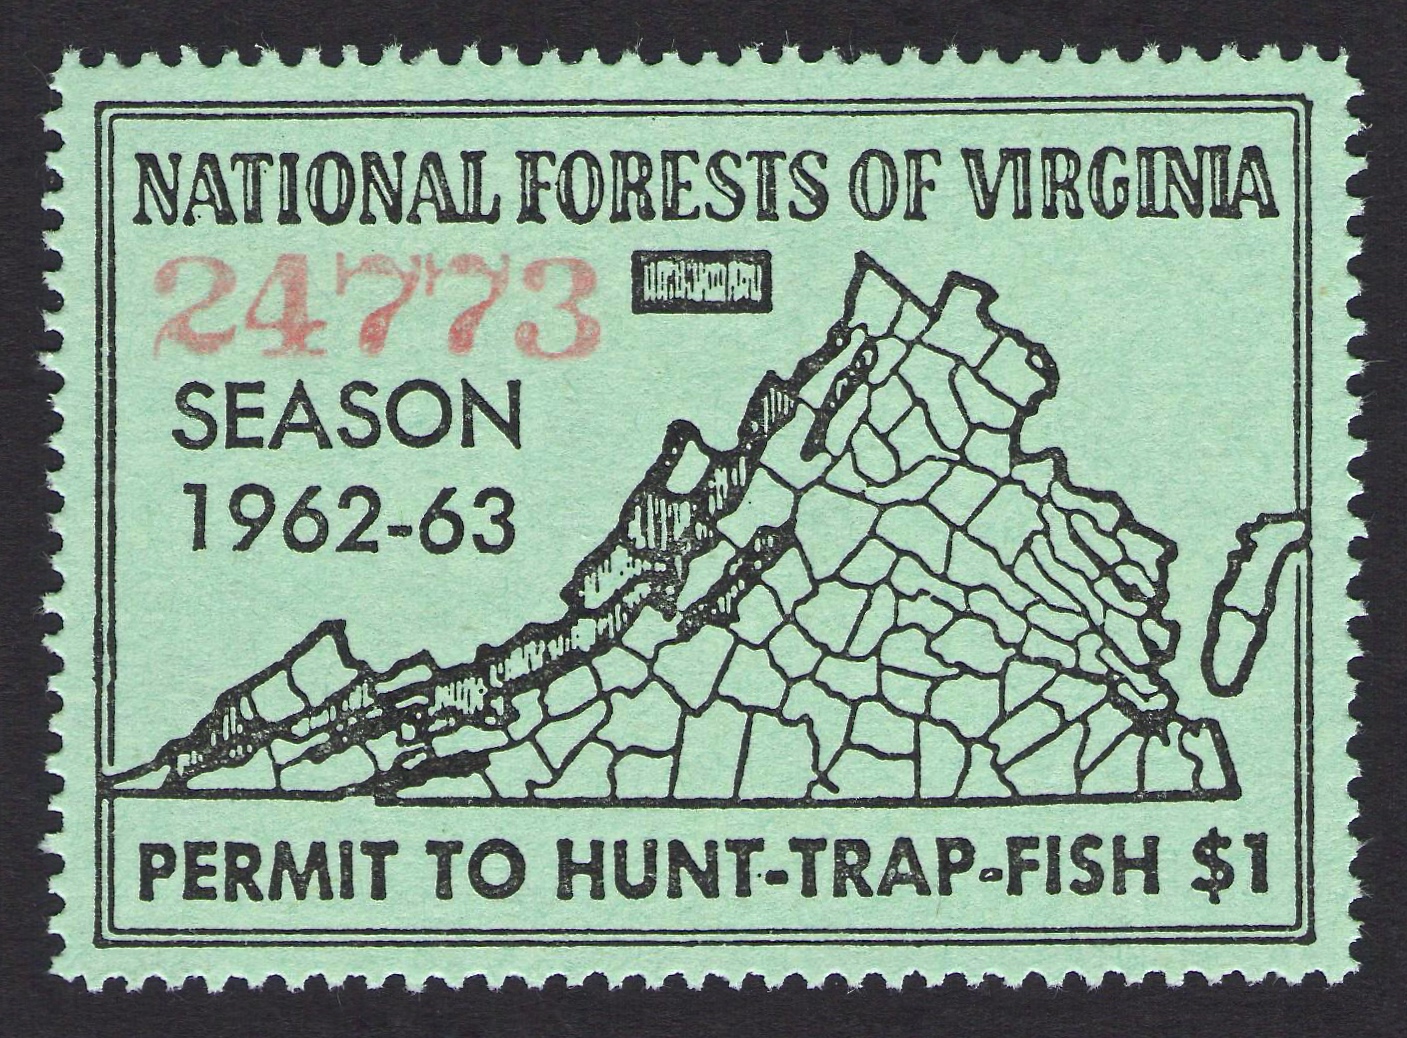 1962-63 National Forest Virginia